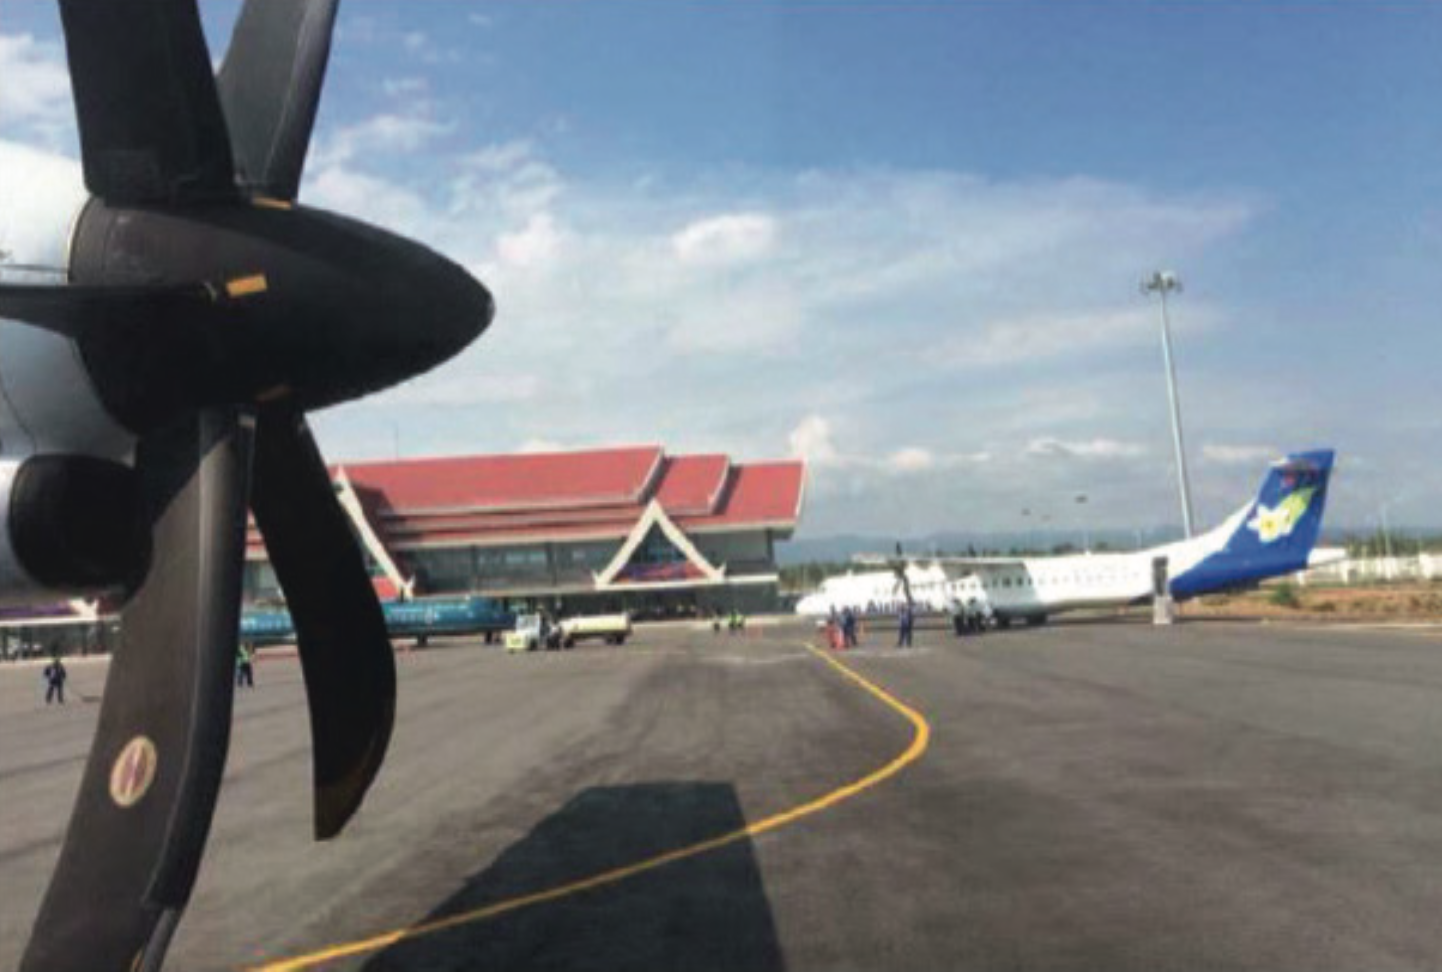 Supply, Installation of Airground Lighting System Noongkhang Airport, Laos